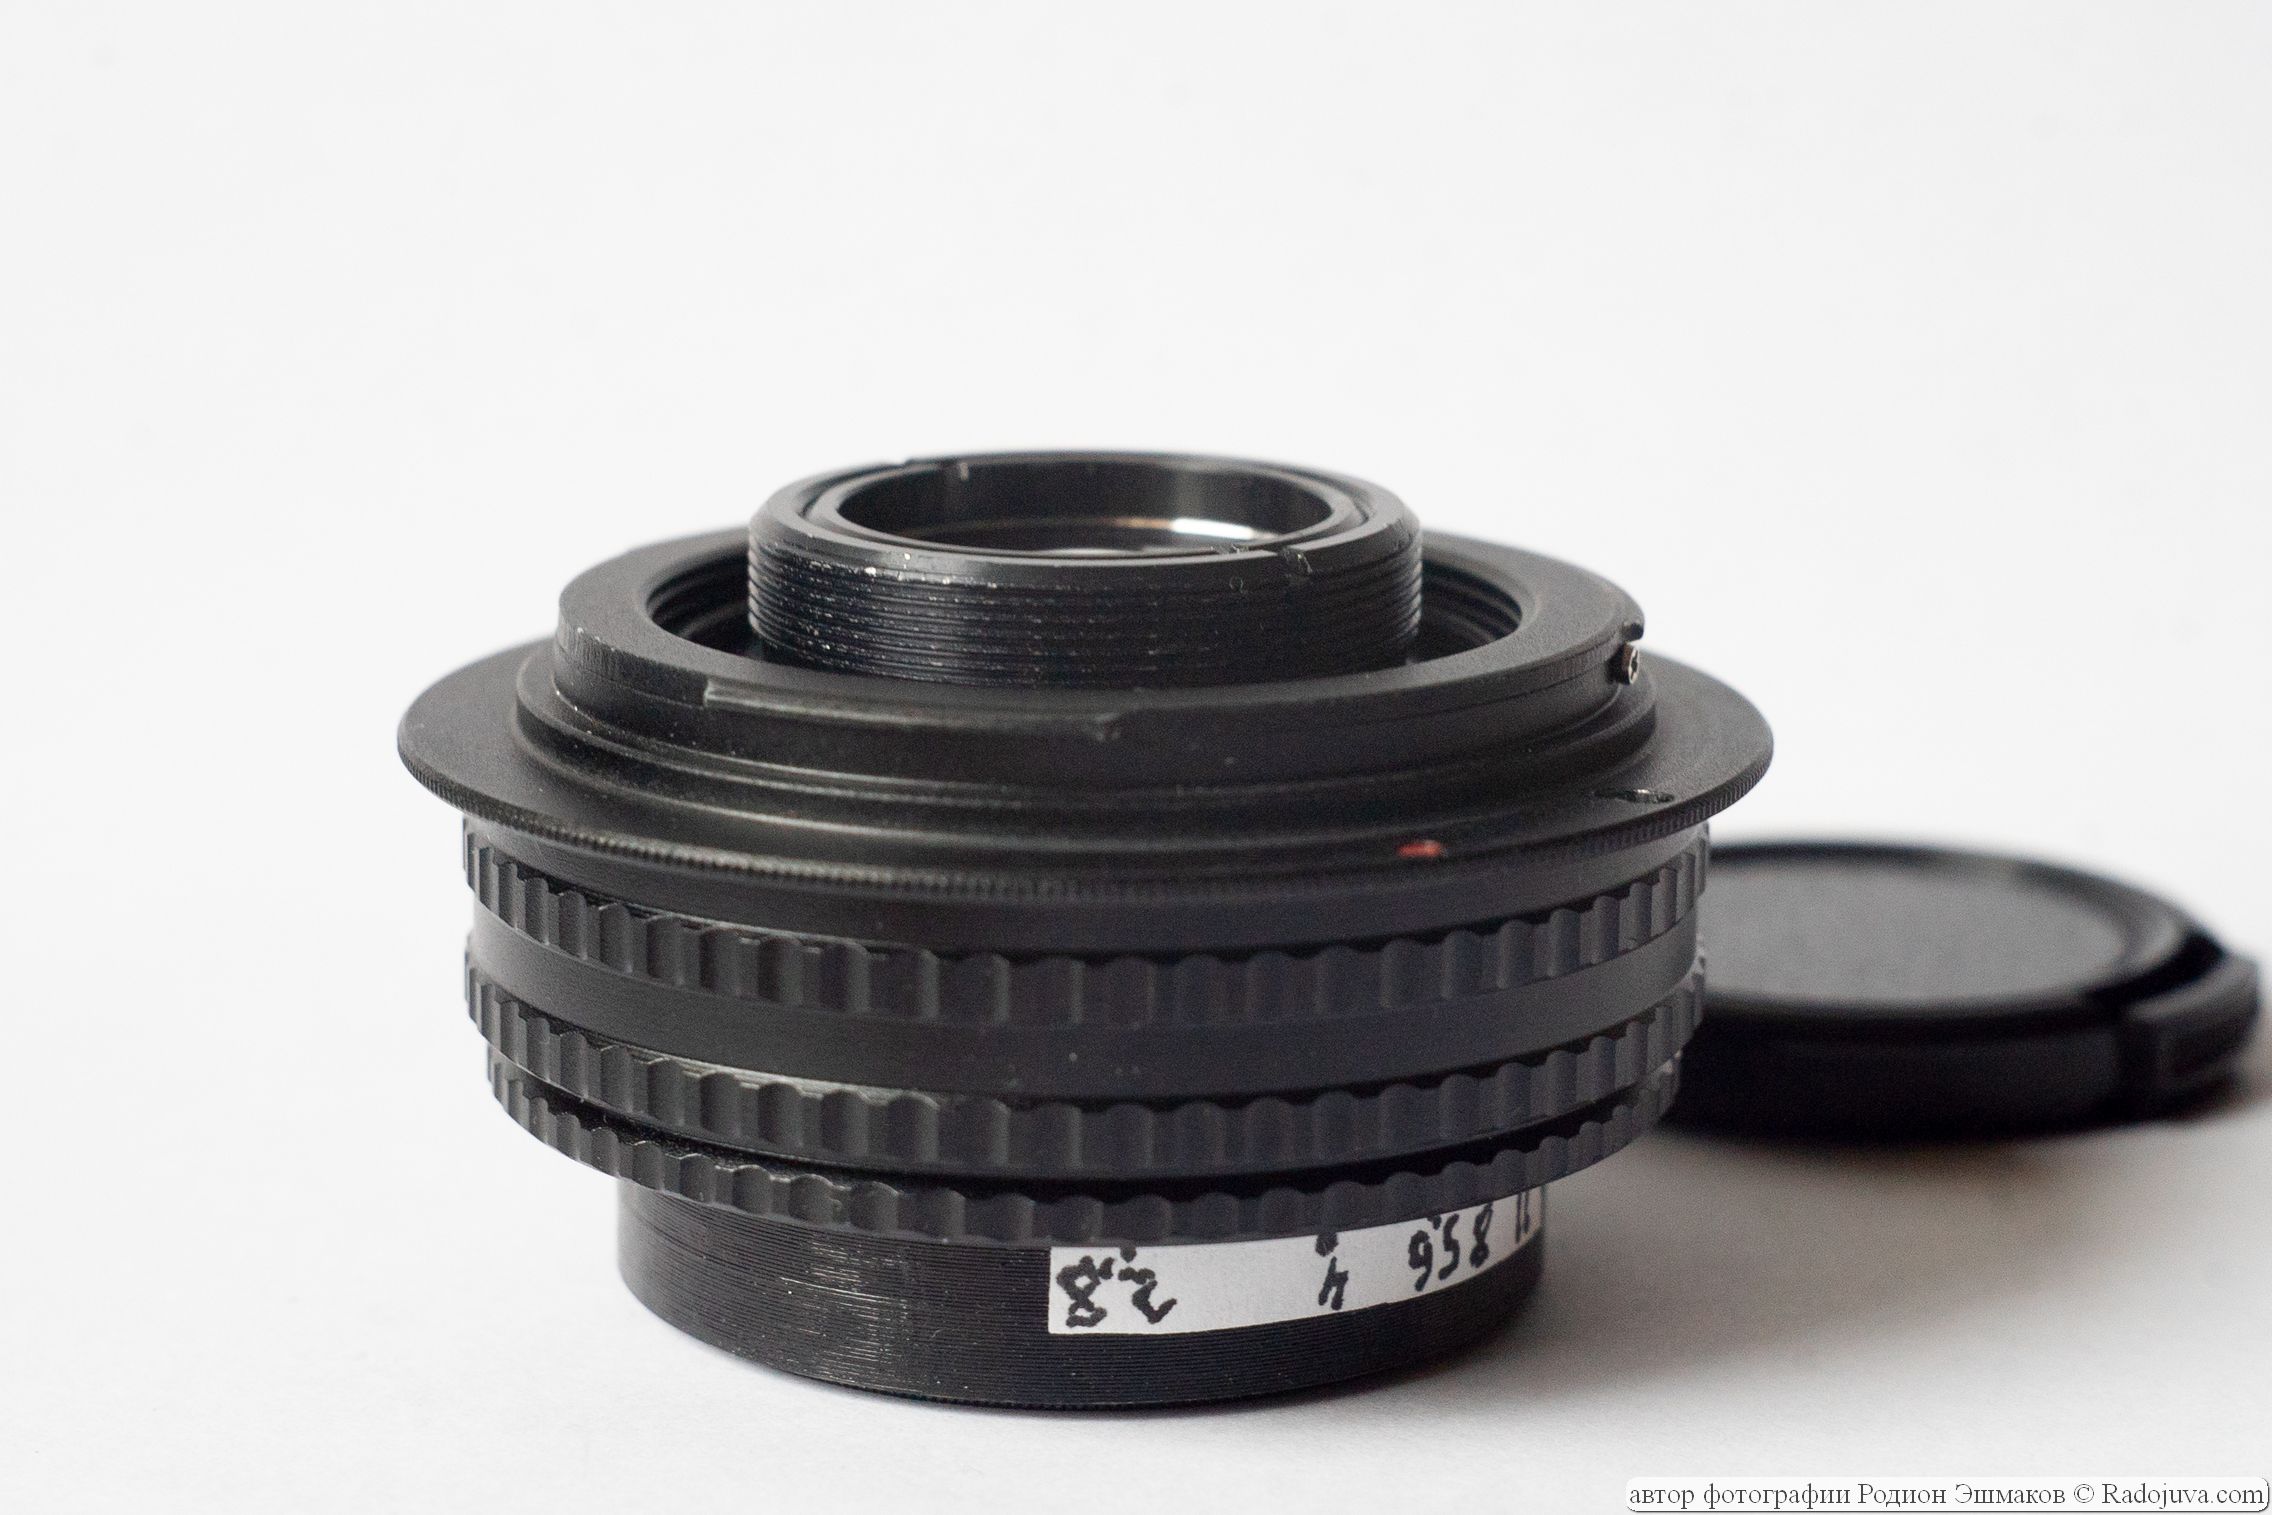 The back of the lens block protruding beyond the bayonet plane is the reason for incompatibility with full-frame SLR cameras.